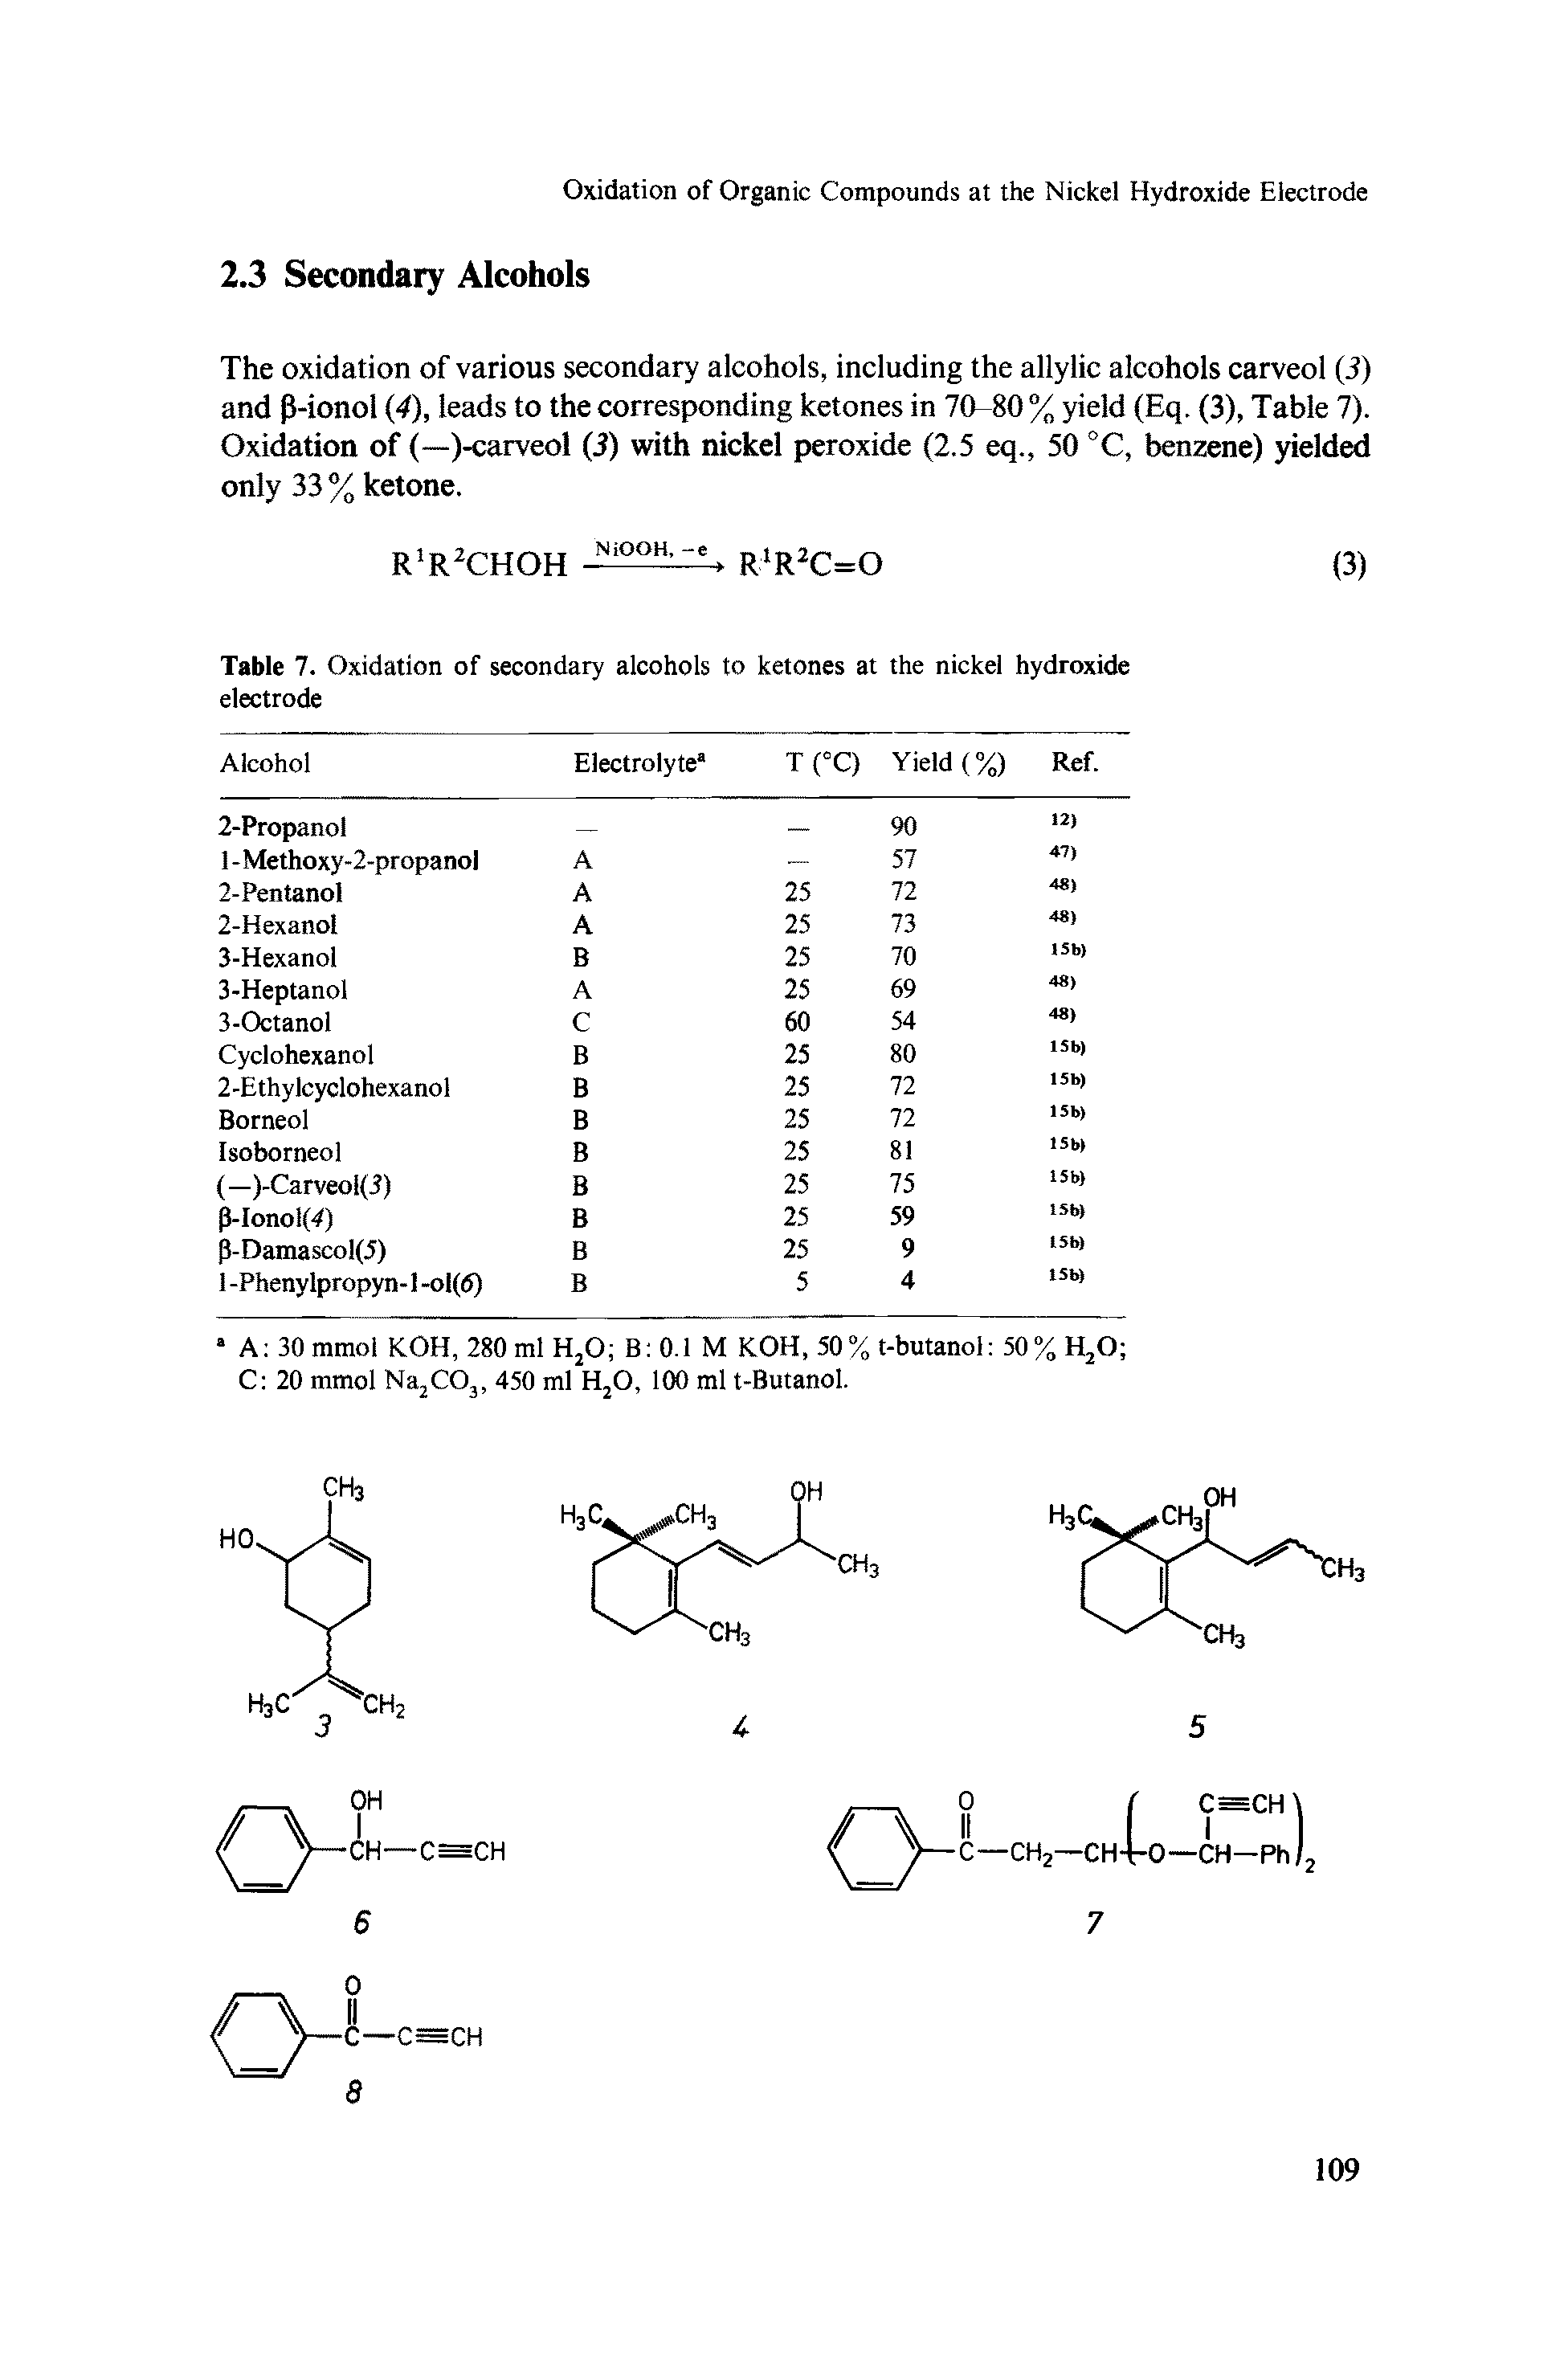 Table 7. Oxidation of secondary alcohols to ketones at the nickel hydroxide electrode...